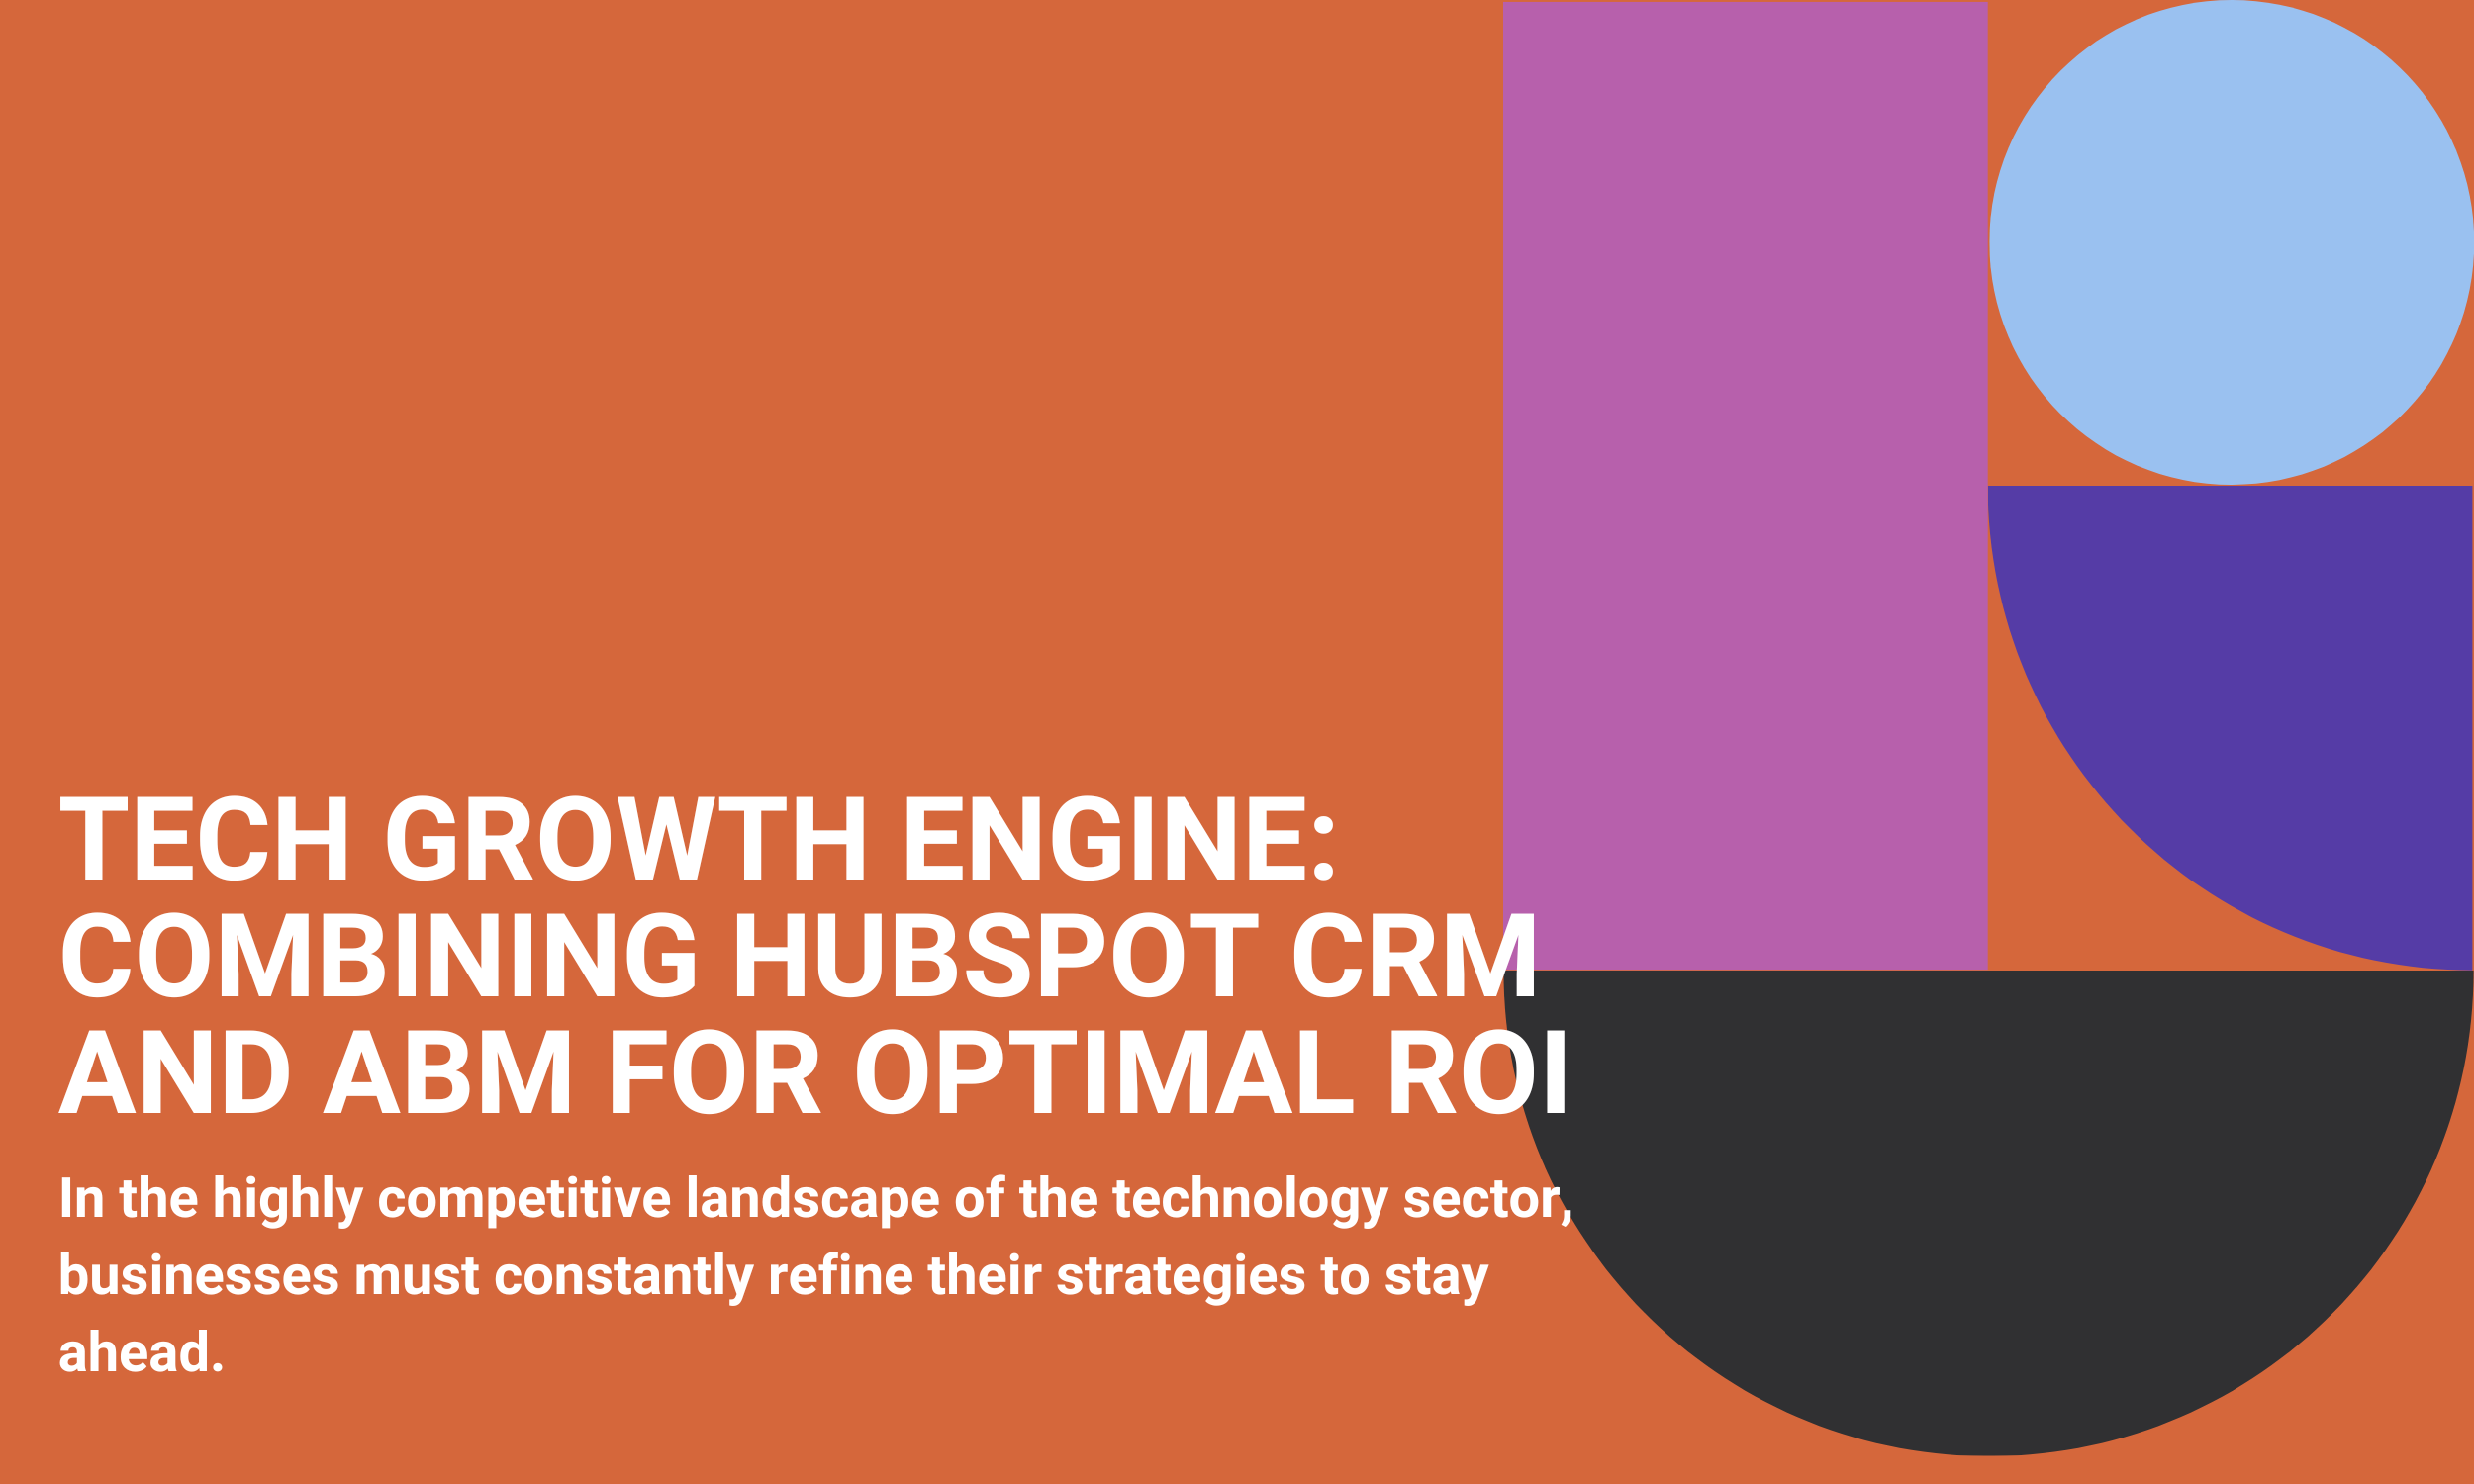 Tech Growth Engine: Combining HubSpot CRM and ABM for Optimal ROI